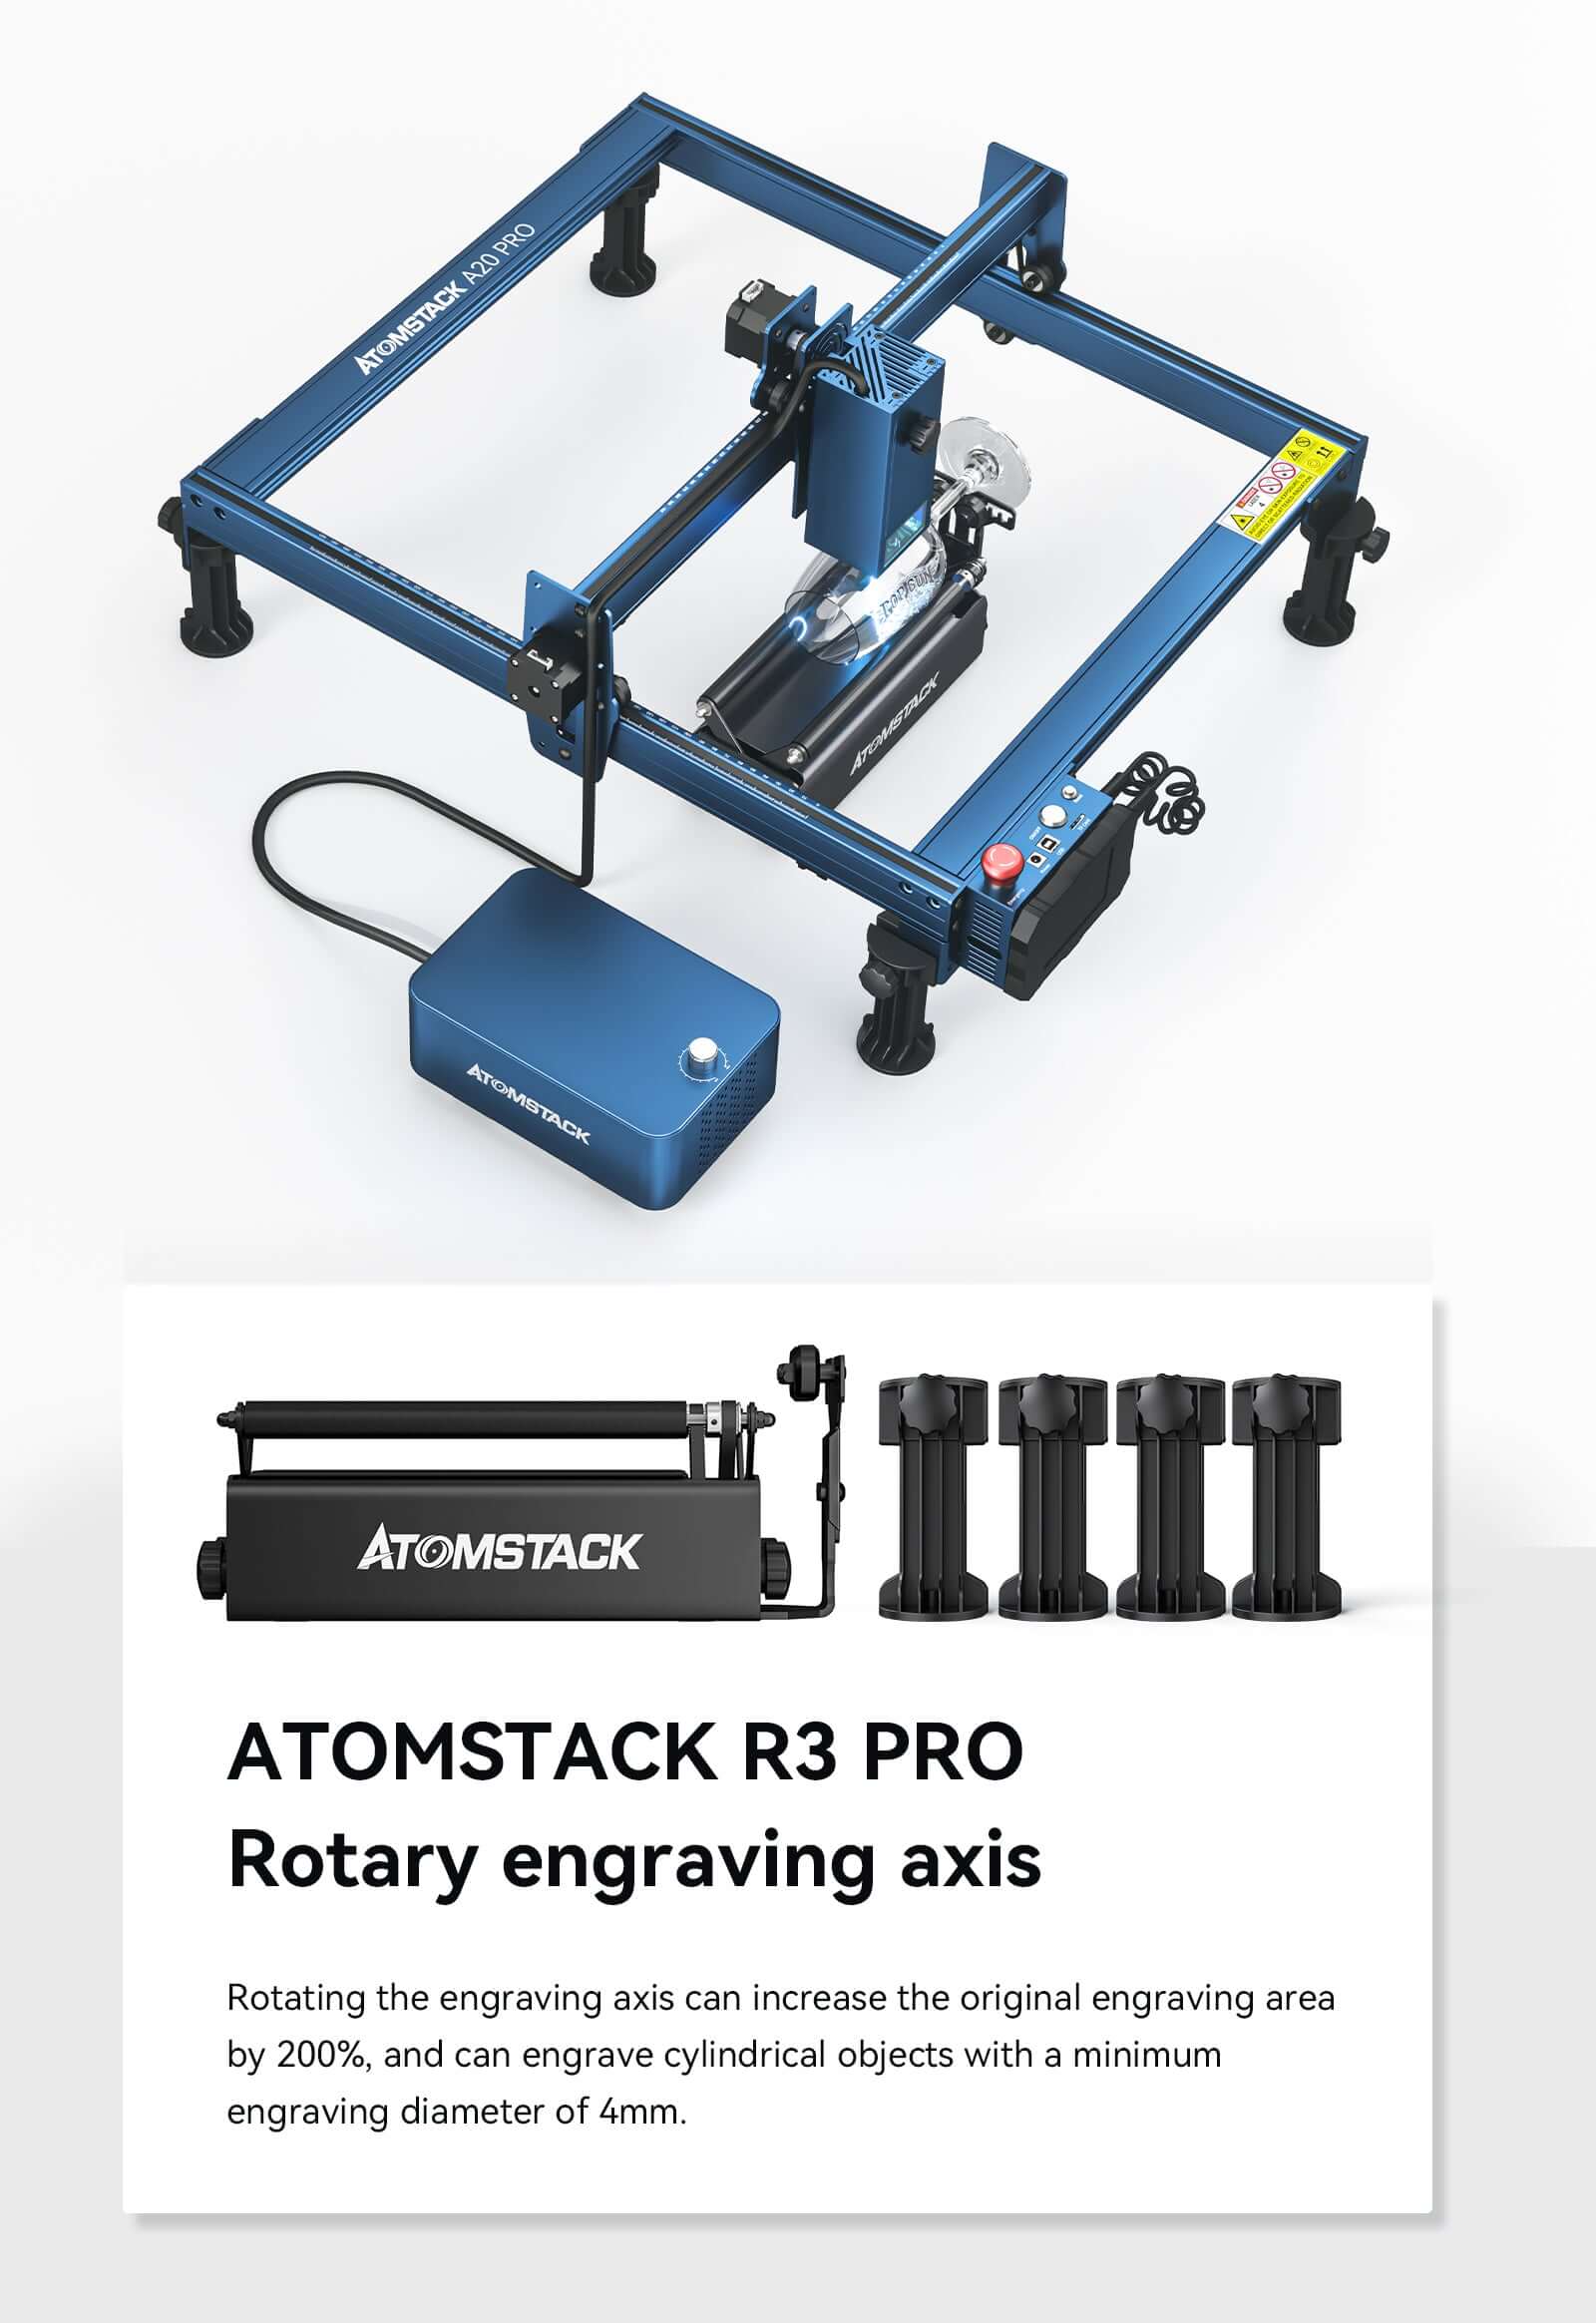 Atomstack X20 A20 S20 Pro 130W Quad-Laser Engraving and Cutting Machine  Built-in Air Assist+Honeycomb Worktable+R3 PRO Rotary